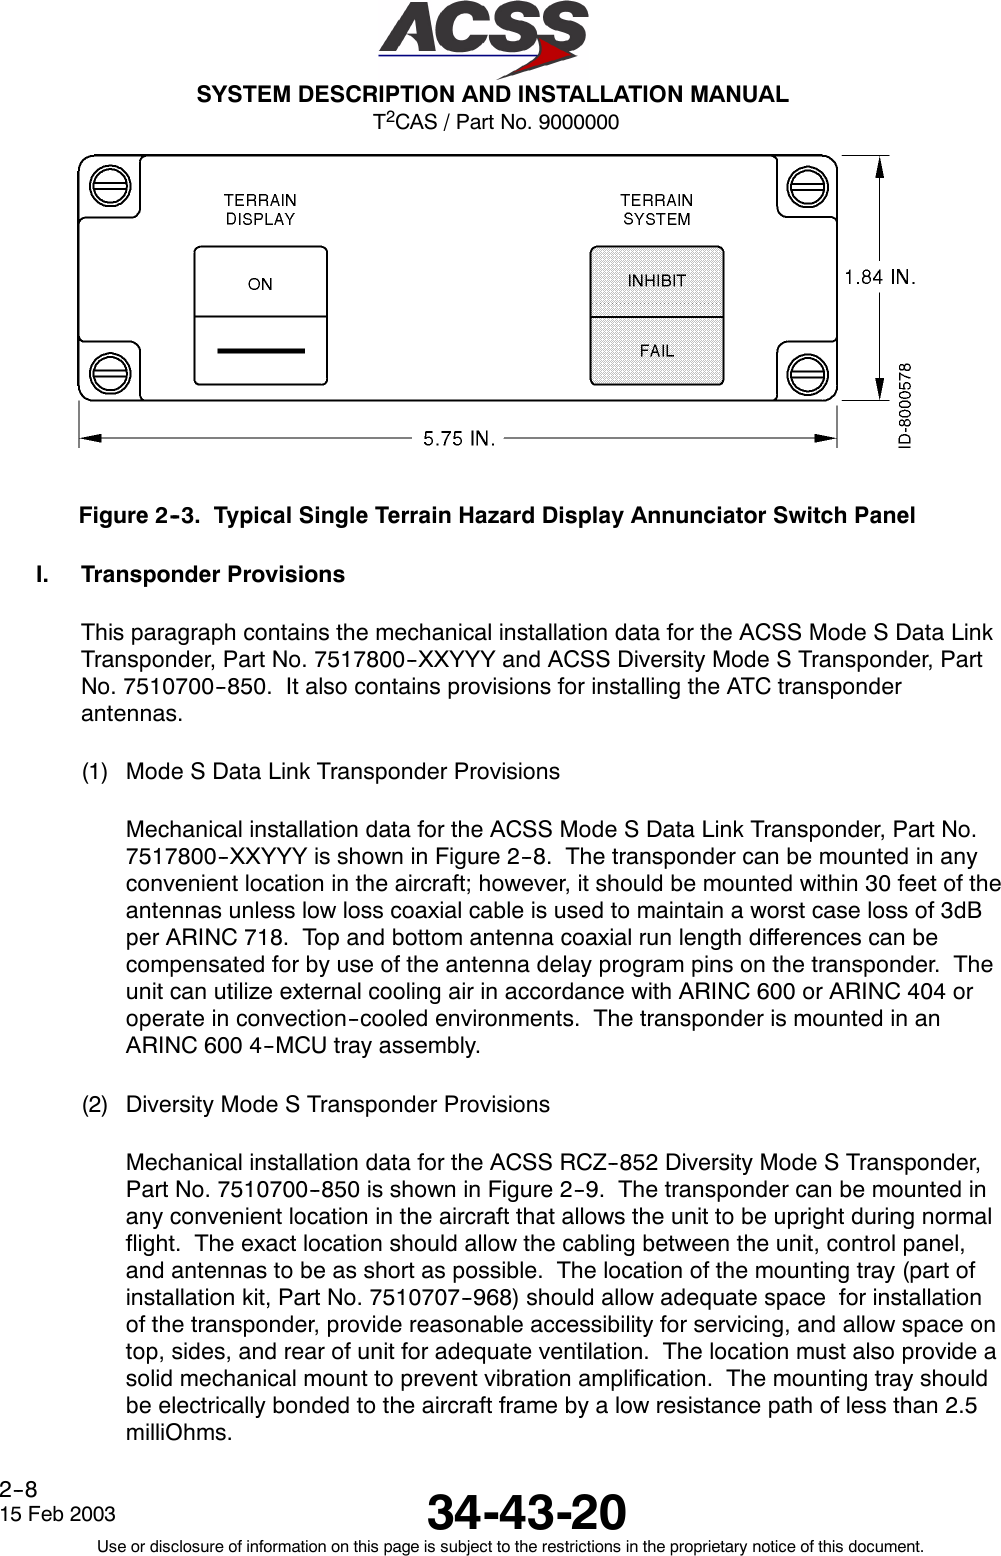 T2CAS / Part No. 9000000SYSTEM DESCRIPTION AND INSTALLATION MANUAL34-43-2015 Feb 2003Use or disclosure of information on this page is subject to the restrictions in the proprietary notice of this document.2--8Figure 2--3. Typical Single Terrain Hazard Display Annunciator Switch PanelI. Transponder ProvisionsThis paragraph contains the mechanical installation data for the ACSS Mode S Data LinkTransponder, Part No. 7517800--XXYYY and ACSS Diversity Mode S Transponder, PartNo. 7510700--850. It also contains provisions for installing the ATC transponderantennas.(1) Mode S Data Link Transponder ProvisionsMechanical installation data for the ACSS Mode S Data Link Transponder, Part No.7517800--XXYYY is shown in Figure 2--8. The transponder can be mounted in anyconvenient location in the aircraft; however, it should be mounted within 30 feet of theantennas unless low loss coaxial cable is used to maintain a worst case loss of 3dBper ARINC 718. Top and bottom antenna coaxial run length differences can becompensated for by use of the antenna delay program pins on the transponder. Theunit can utilize external cooling air in accordance with ARINC 600 or ARINC 404 oroperate in convection--cooled environments. The transponder is mounted in anARINC 600 4--MCU tray assembly.(2) Diversity Mode S Transponder ProvisionsMechanical installation data for the ACSS RCZ--852 Diversity Mode S Transponder,Part No. 7510700--850 is shown in Figure 2--9. The transponder can be mounted inany convenient location in the aircraft that allows the unit to be upright during normalflight. The exact location should allow the cabling between the unit, control panel,and antennas to be as short as possible. The location of the mounting tray (part ofinstallation kit, Part No. 7510707--968) should allow adequate space for installationof the transponder, provide reasonable accessibility for servicing, and allow space ontop, sides, and rear of unit for adequate ventilation. The location must also provide asolid mechanical mount to prevent vibration amplification. The mounting tray shouldbe electrically bonded to the aircraft frame by a low resistance path of less than 2.5milliOhms.